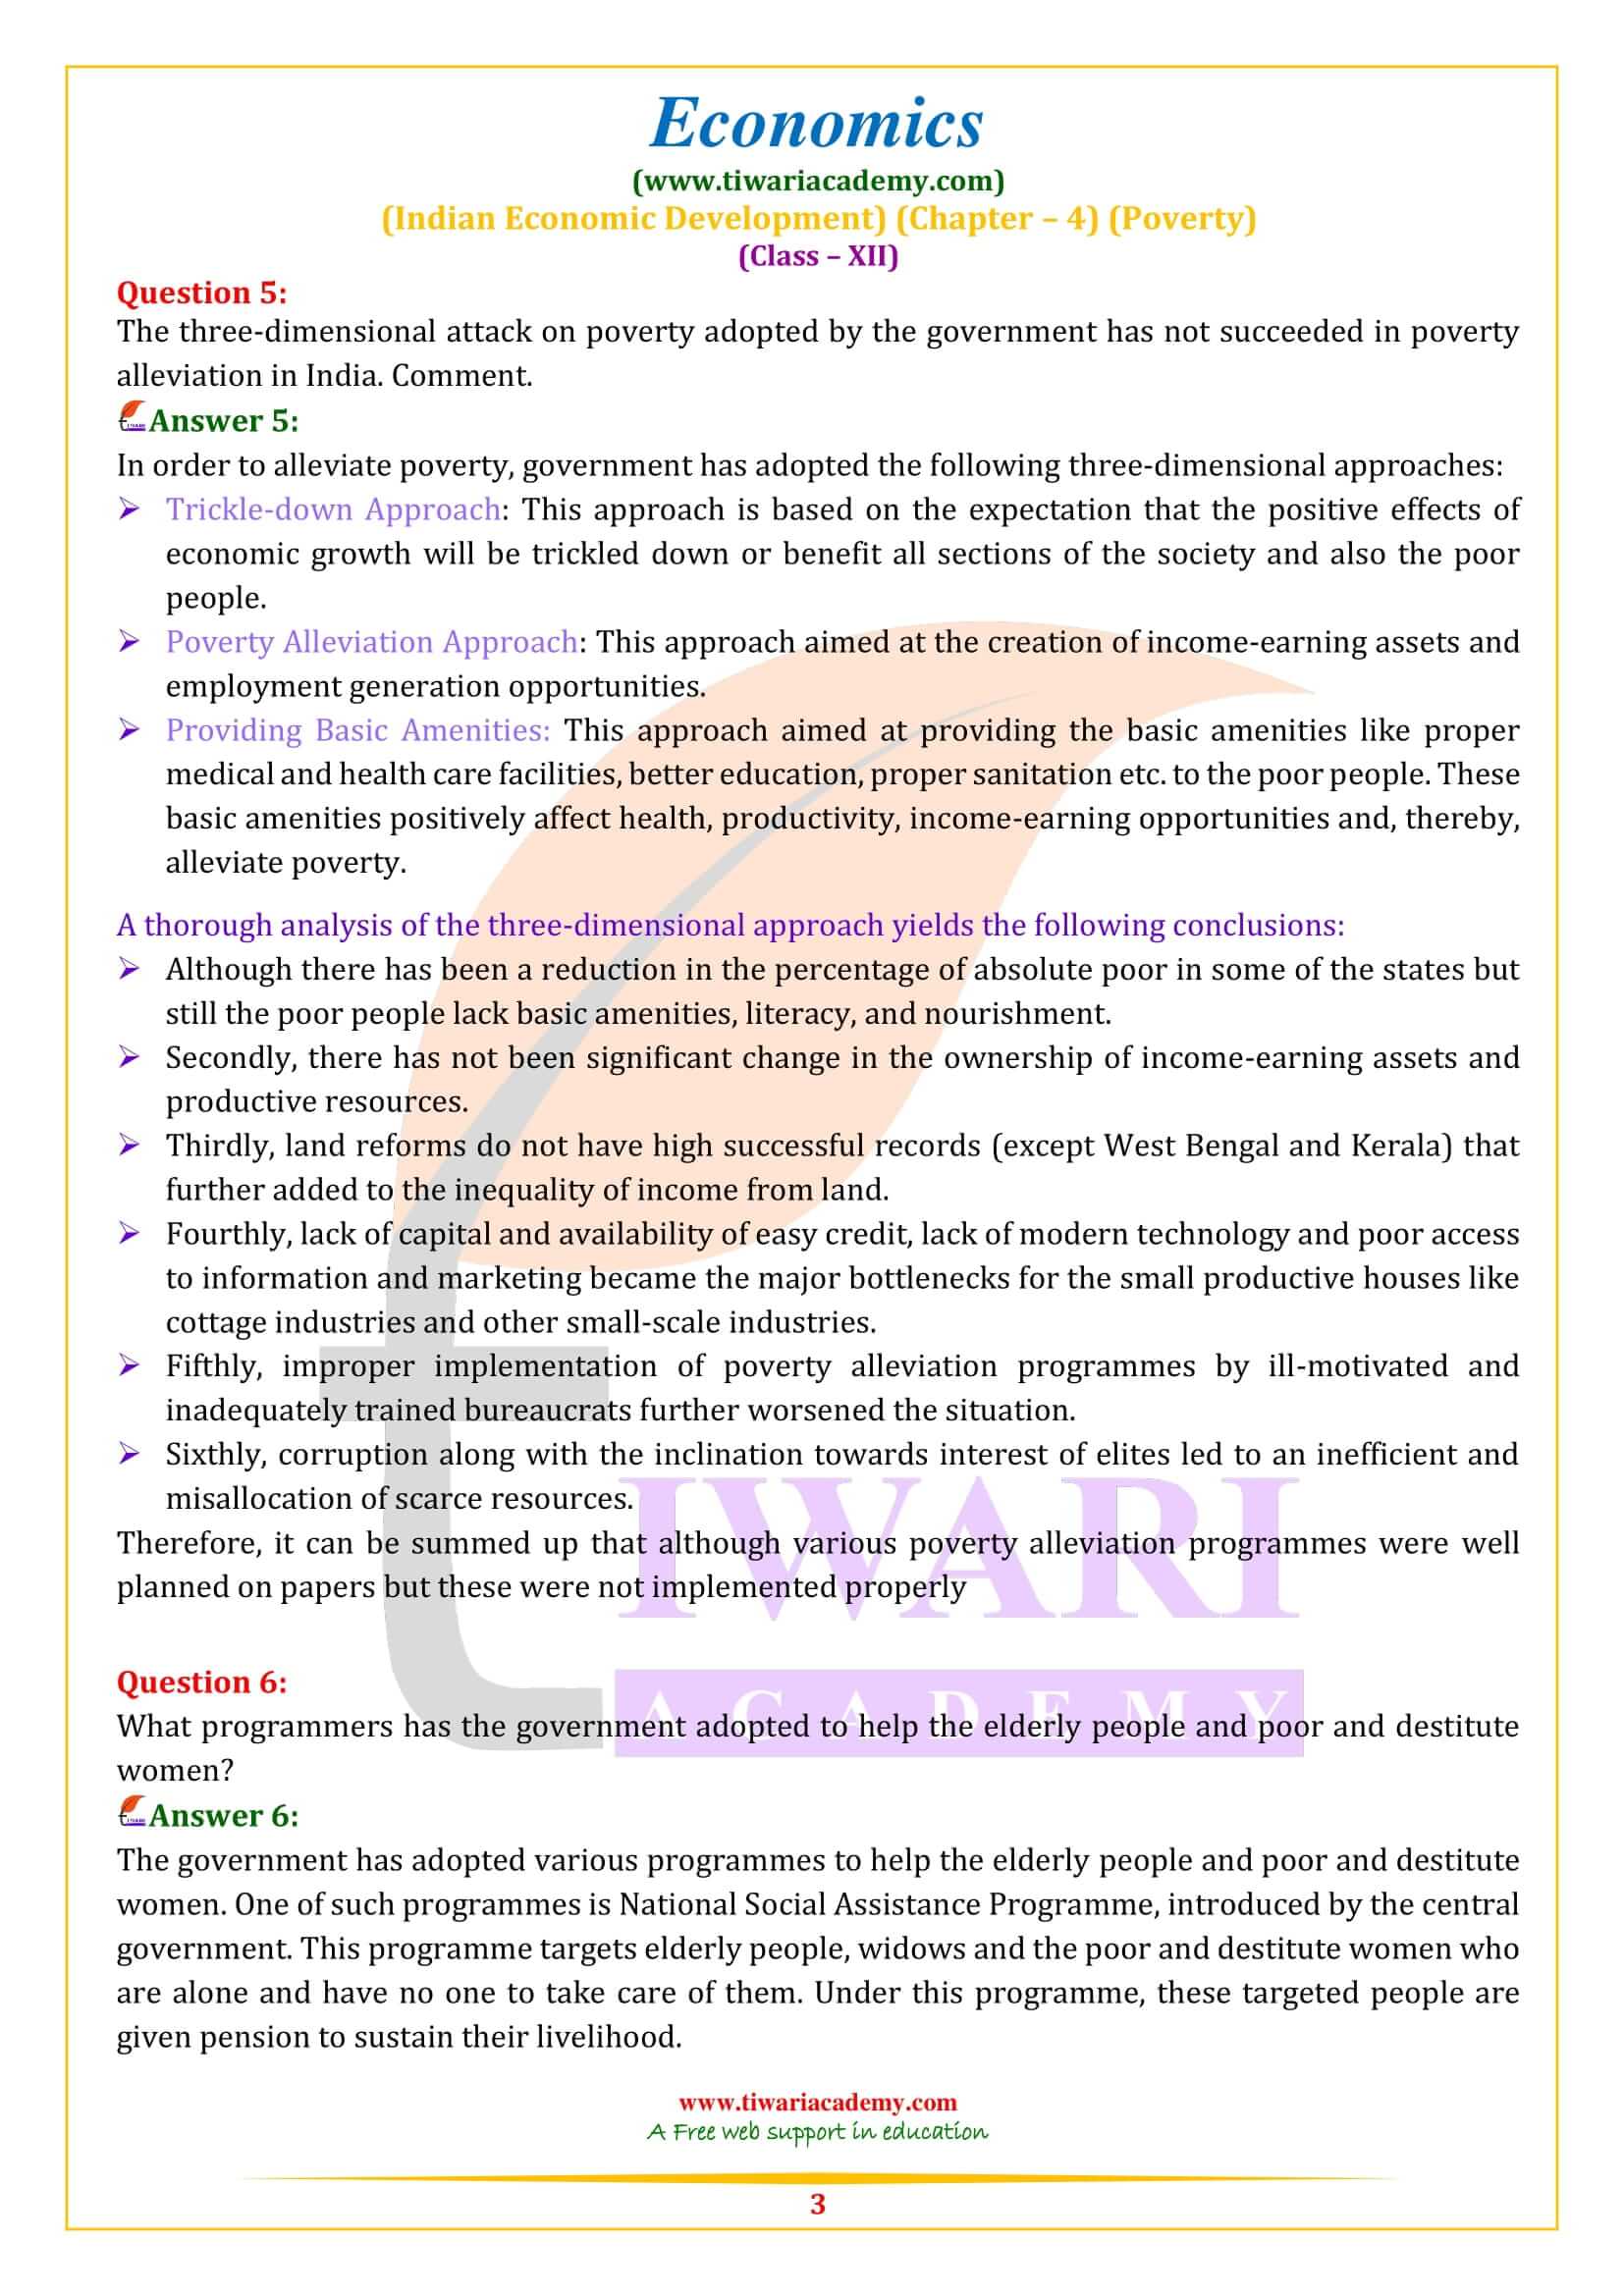 NCERT Solutions for Class 12 Indian Economic Development Chapter 4 guide